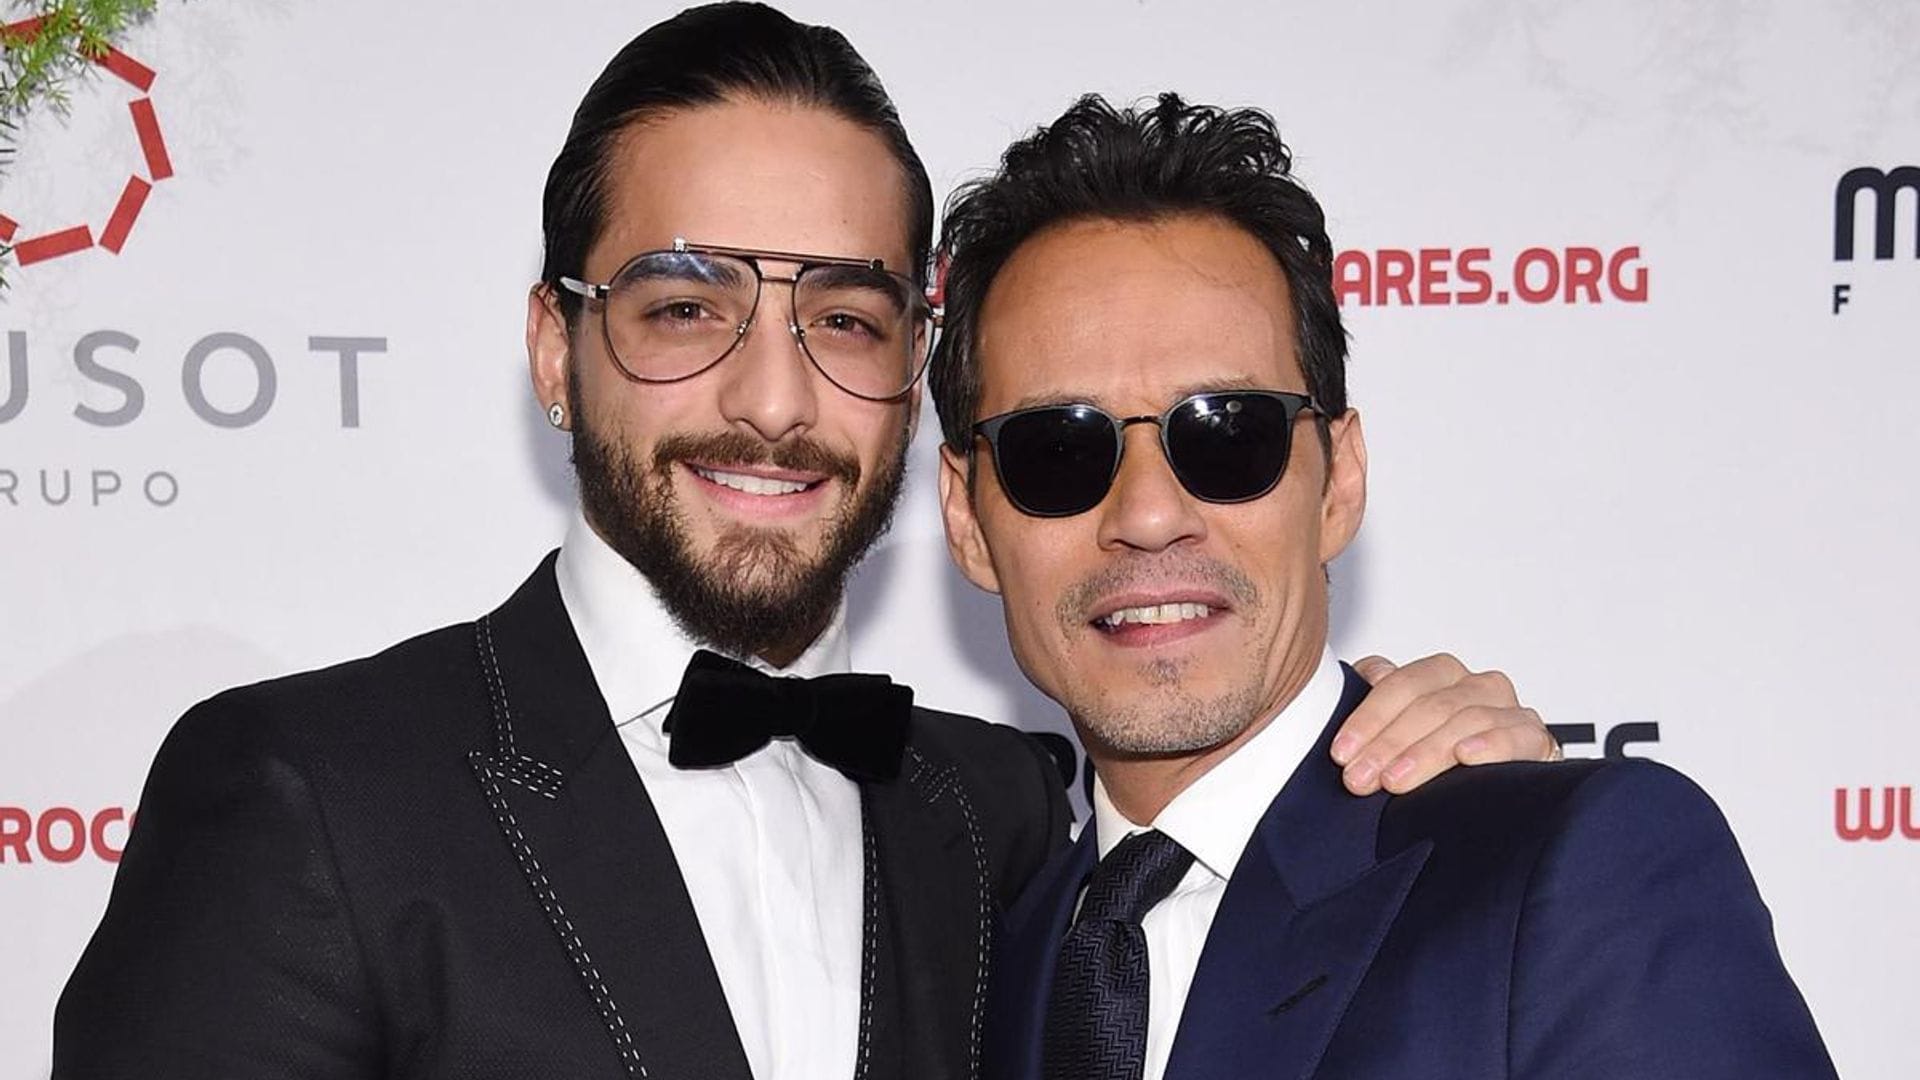 Maluma and Marc Anthony are working on music together! The stars share snaps in the recording studio